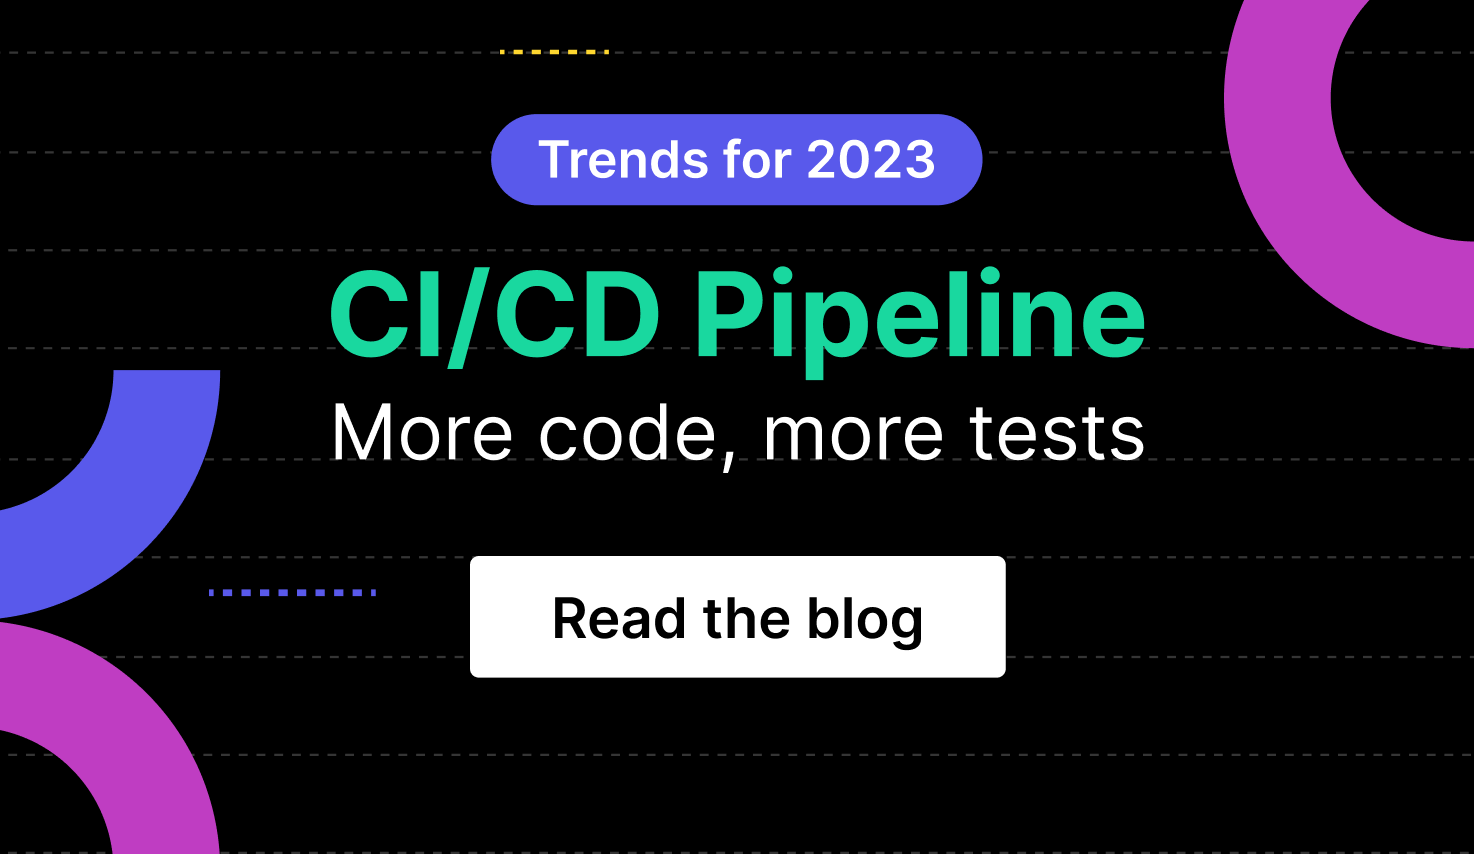 CI/CD Pipeline more code more tests